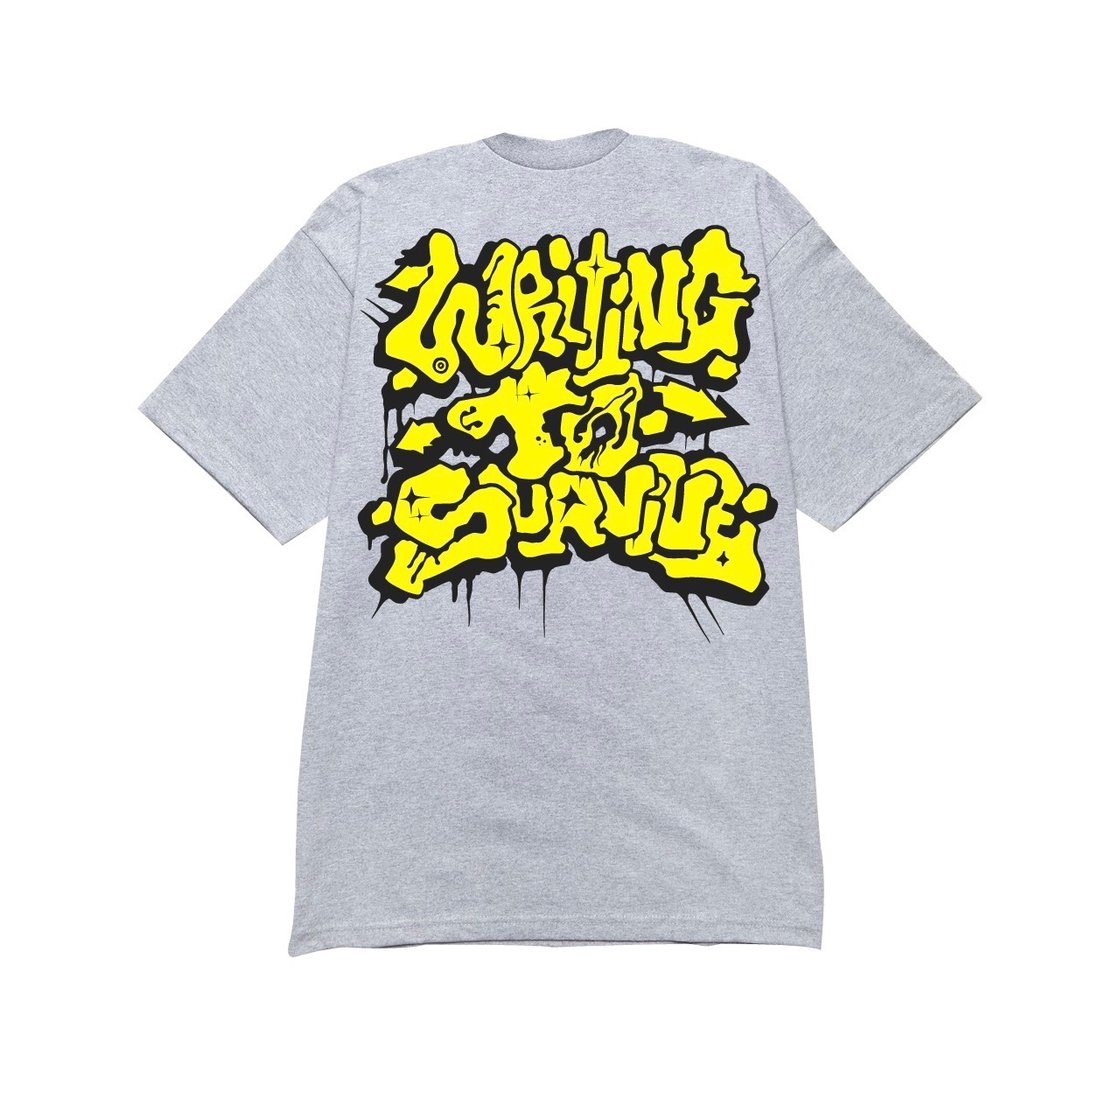 Image of WRITING TO SURVIVE (BLK/GOLD/GREY TEE)